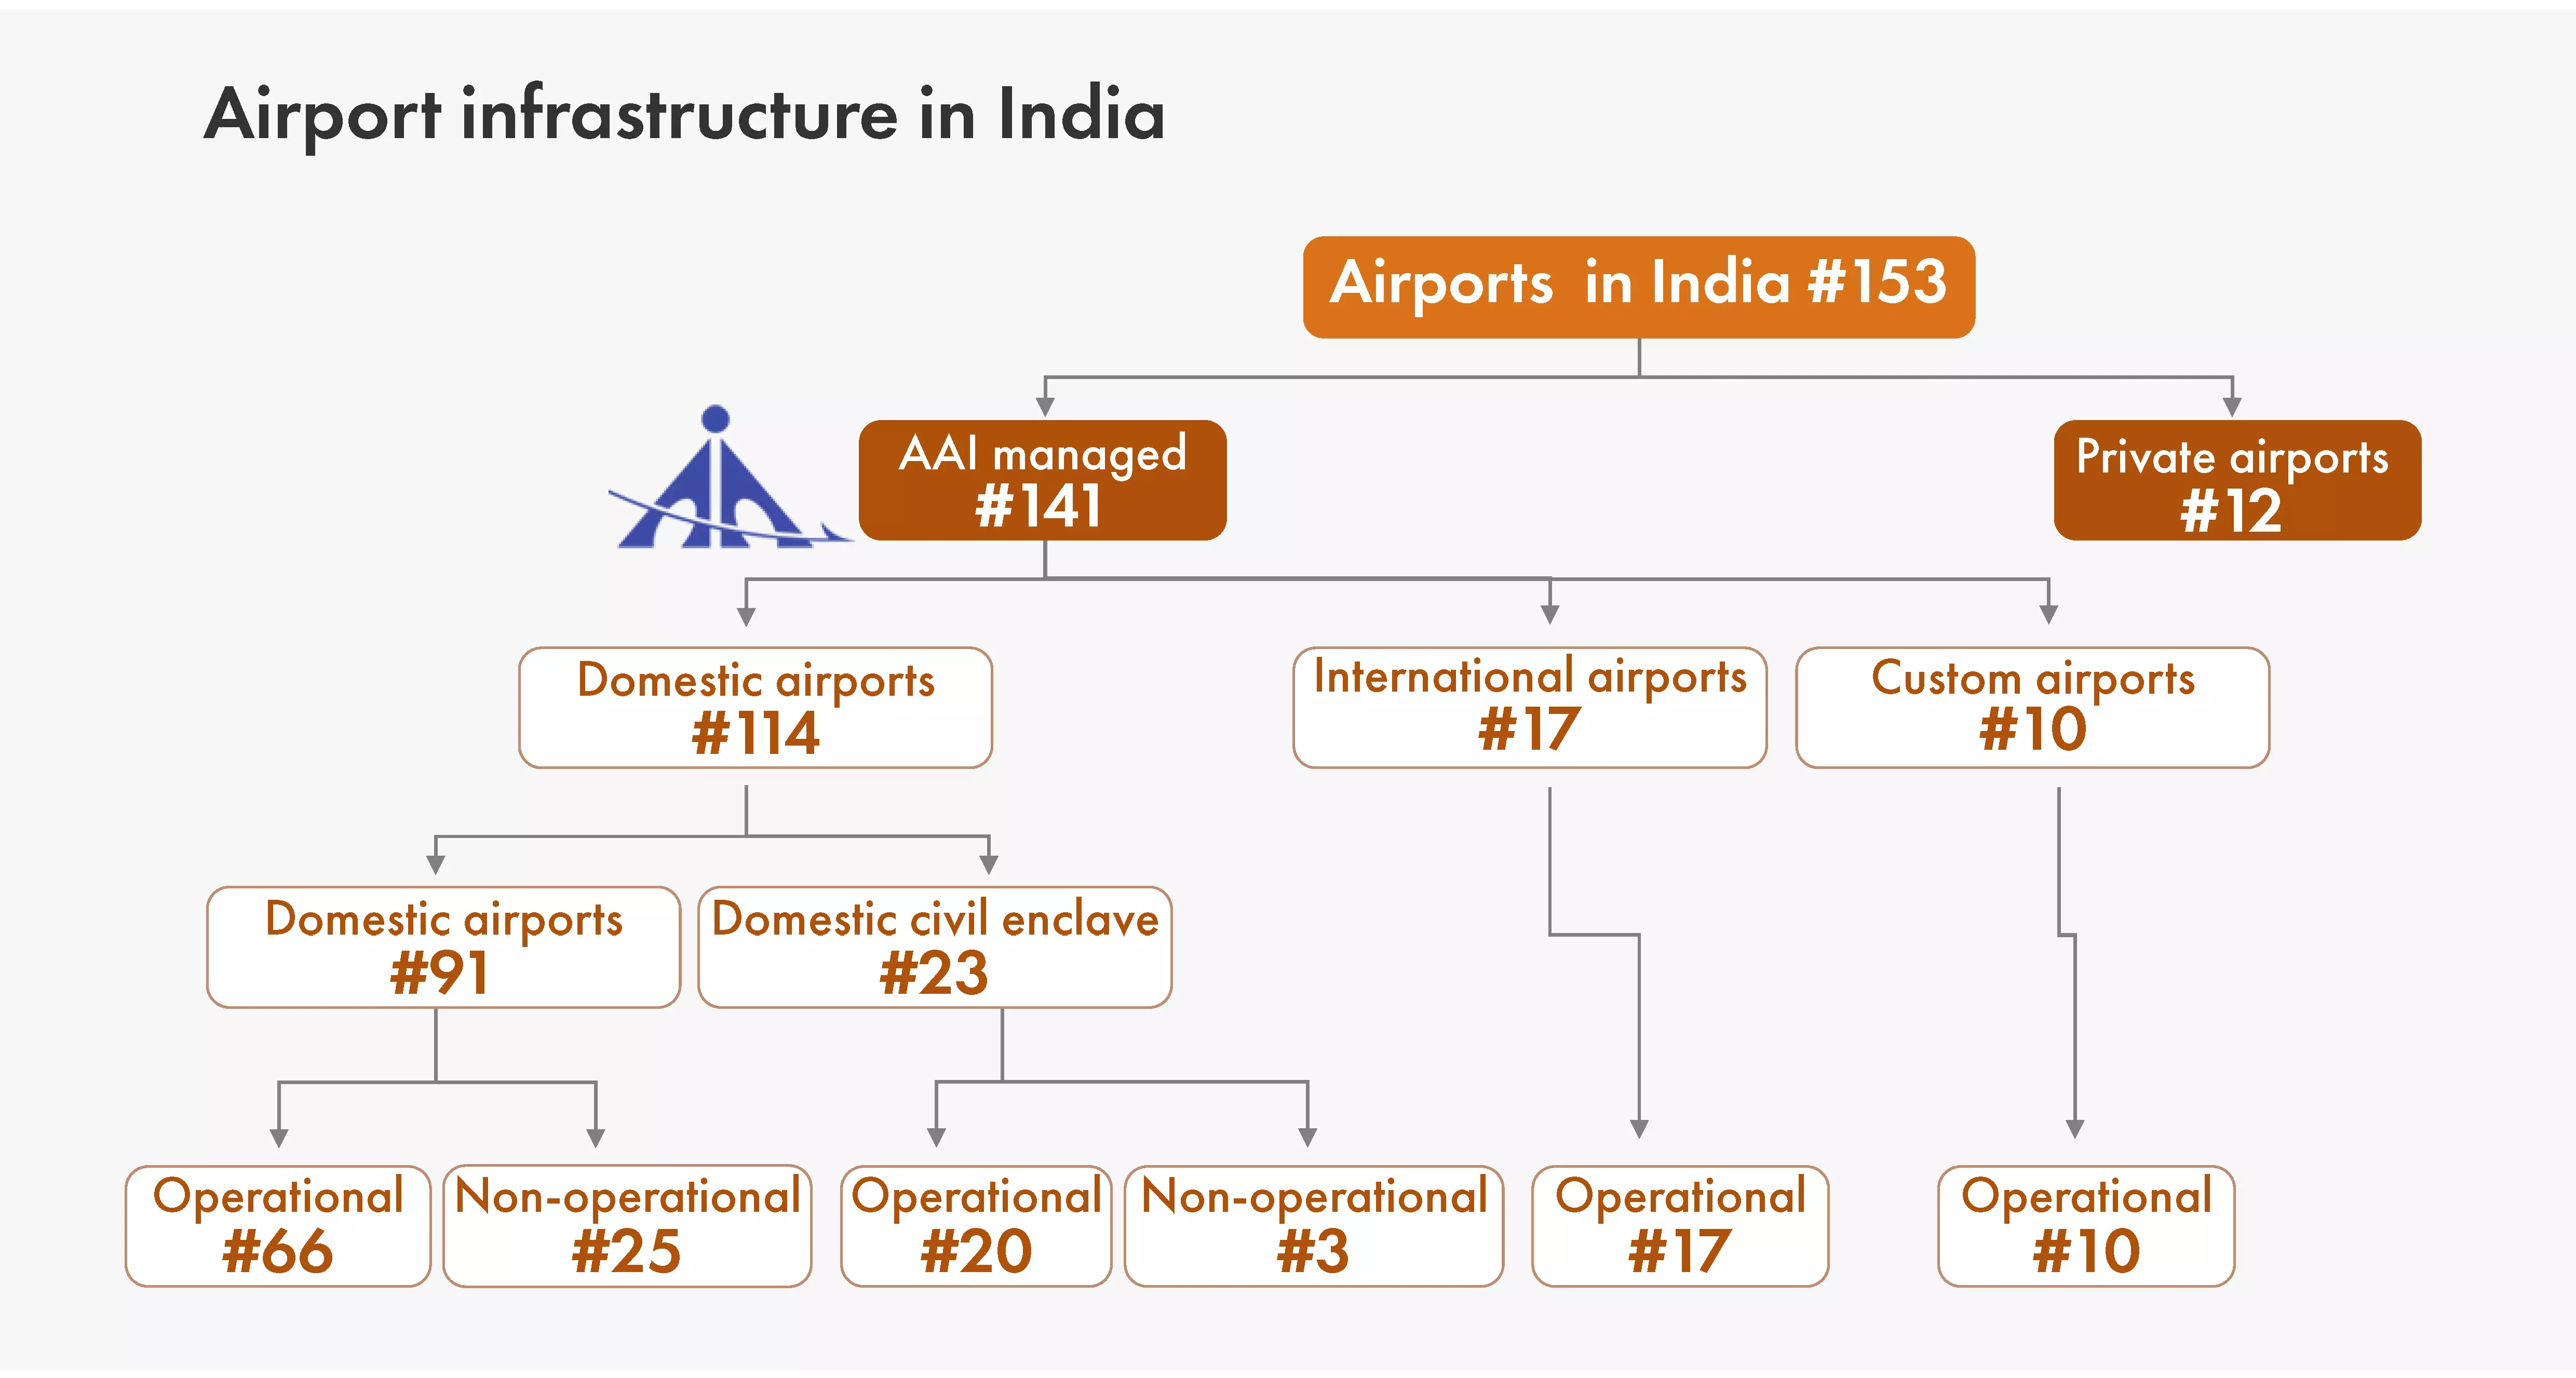 AAI owns and manages the majority of country's airports; the top 5 airports together cater to about 55% of the pax capacity in India